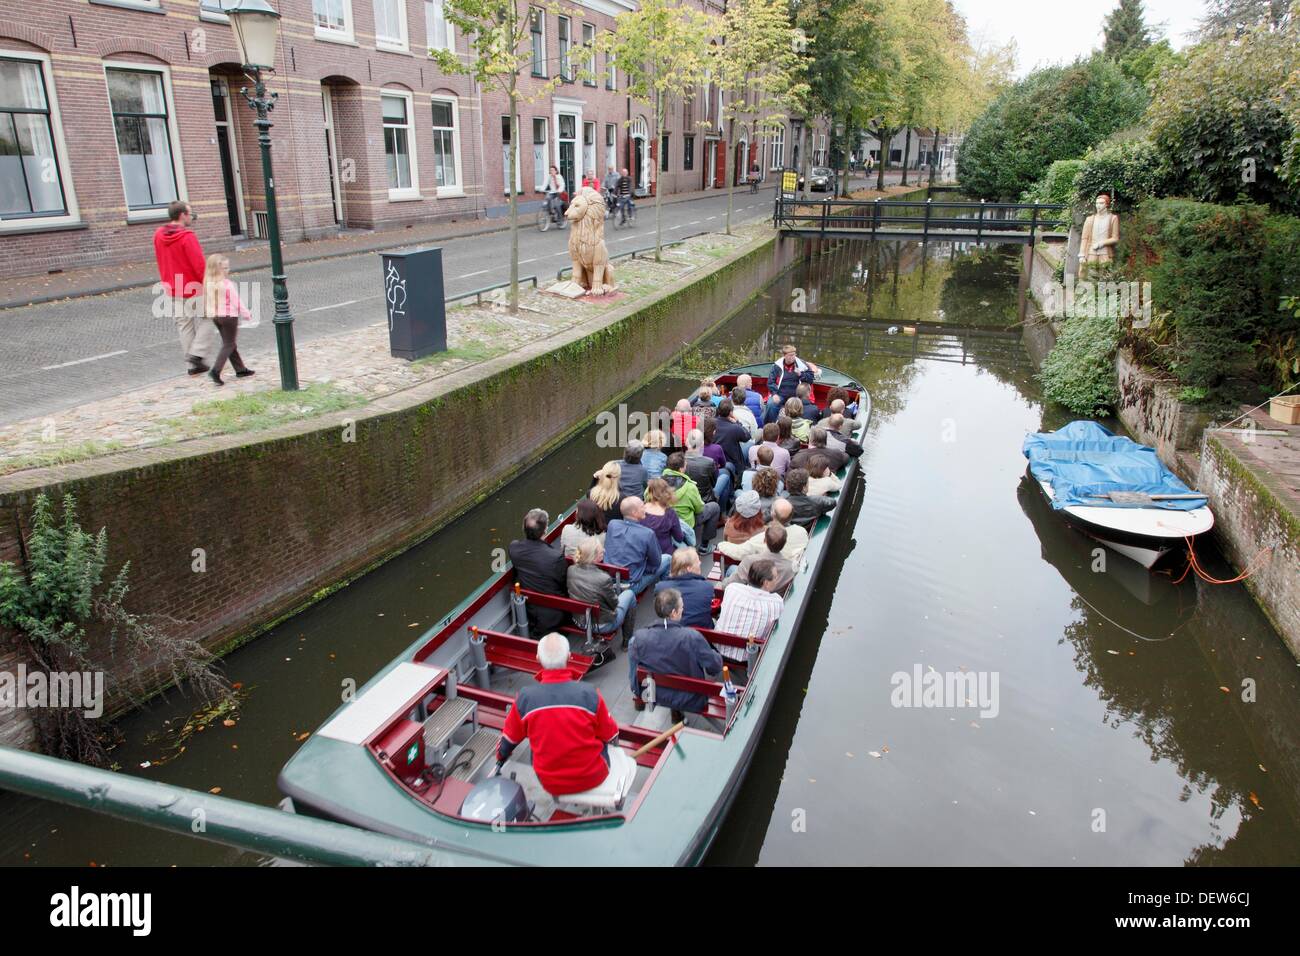 Roundtrip through the canals of the city of Amersfoort, Utrecht province, Netherlands Stock Photo